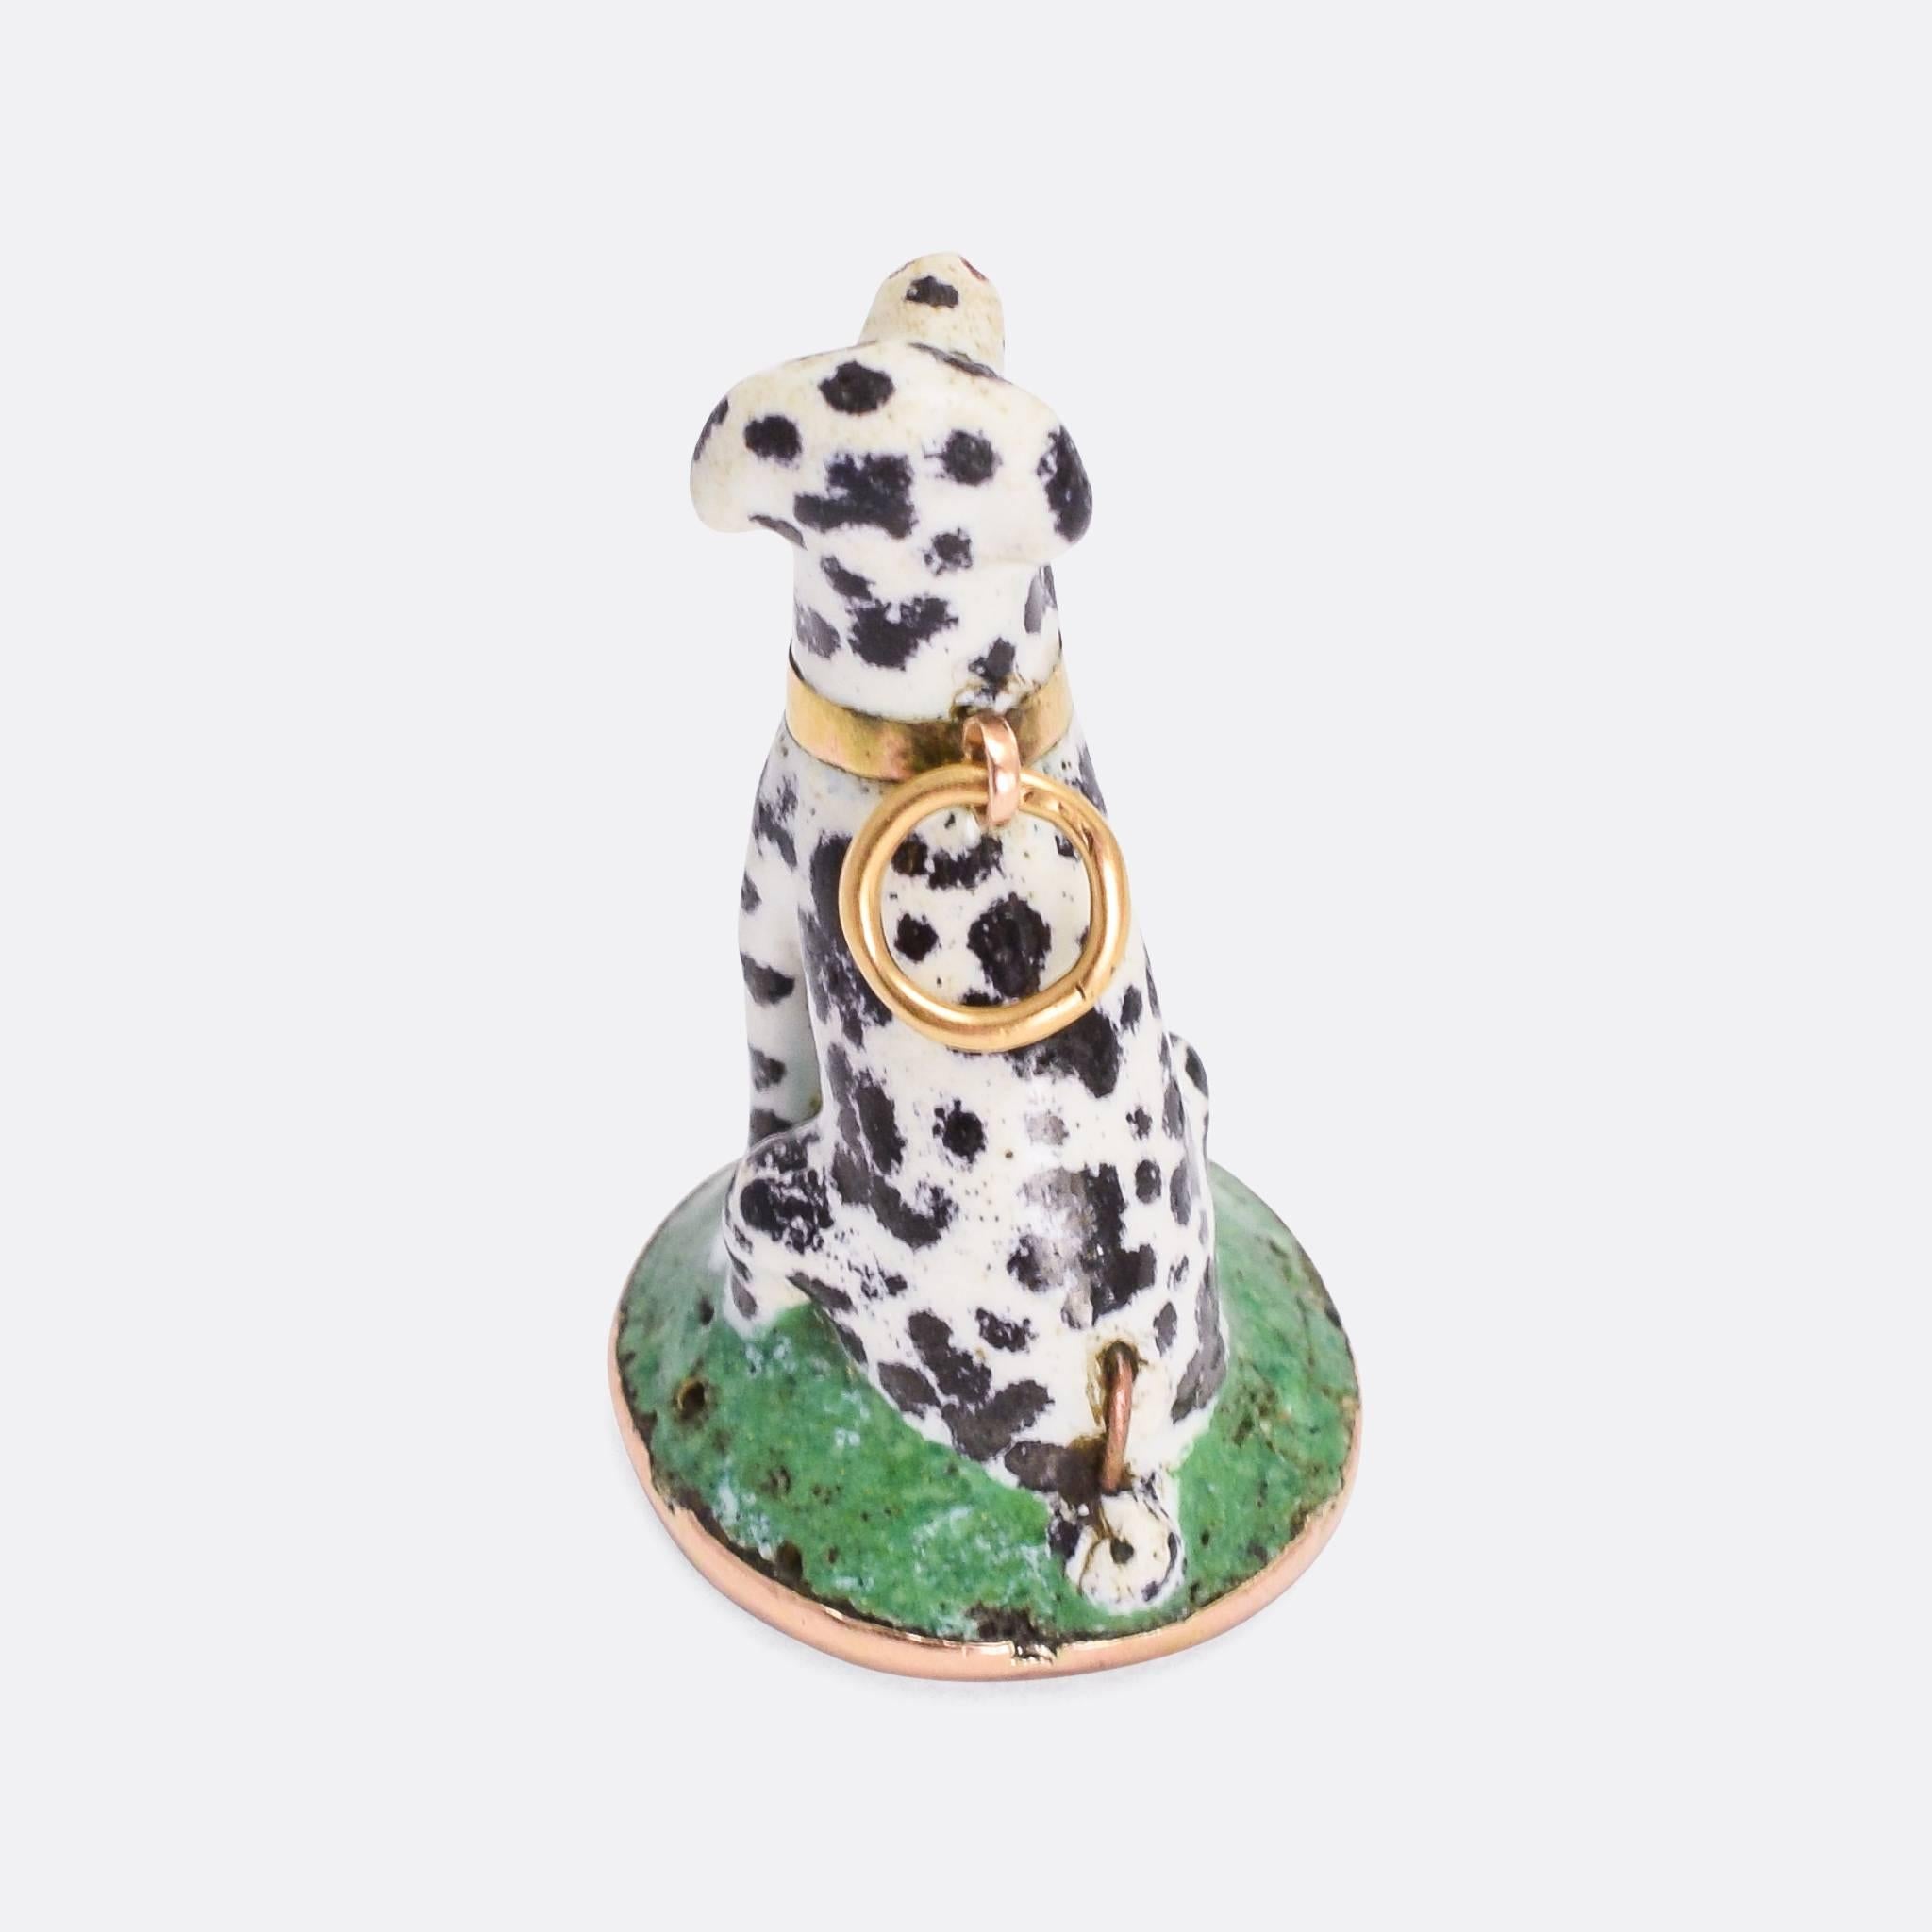 A particularly lovely Chelsea / St. James porcelain seal fob modelled as a dalmatian. The dog is sitting on a green grass base and sports a yellow gold collar, with bail for wear as a pendant. It's beautifully hand-painted and fully original, the